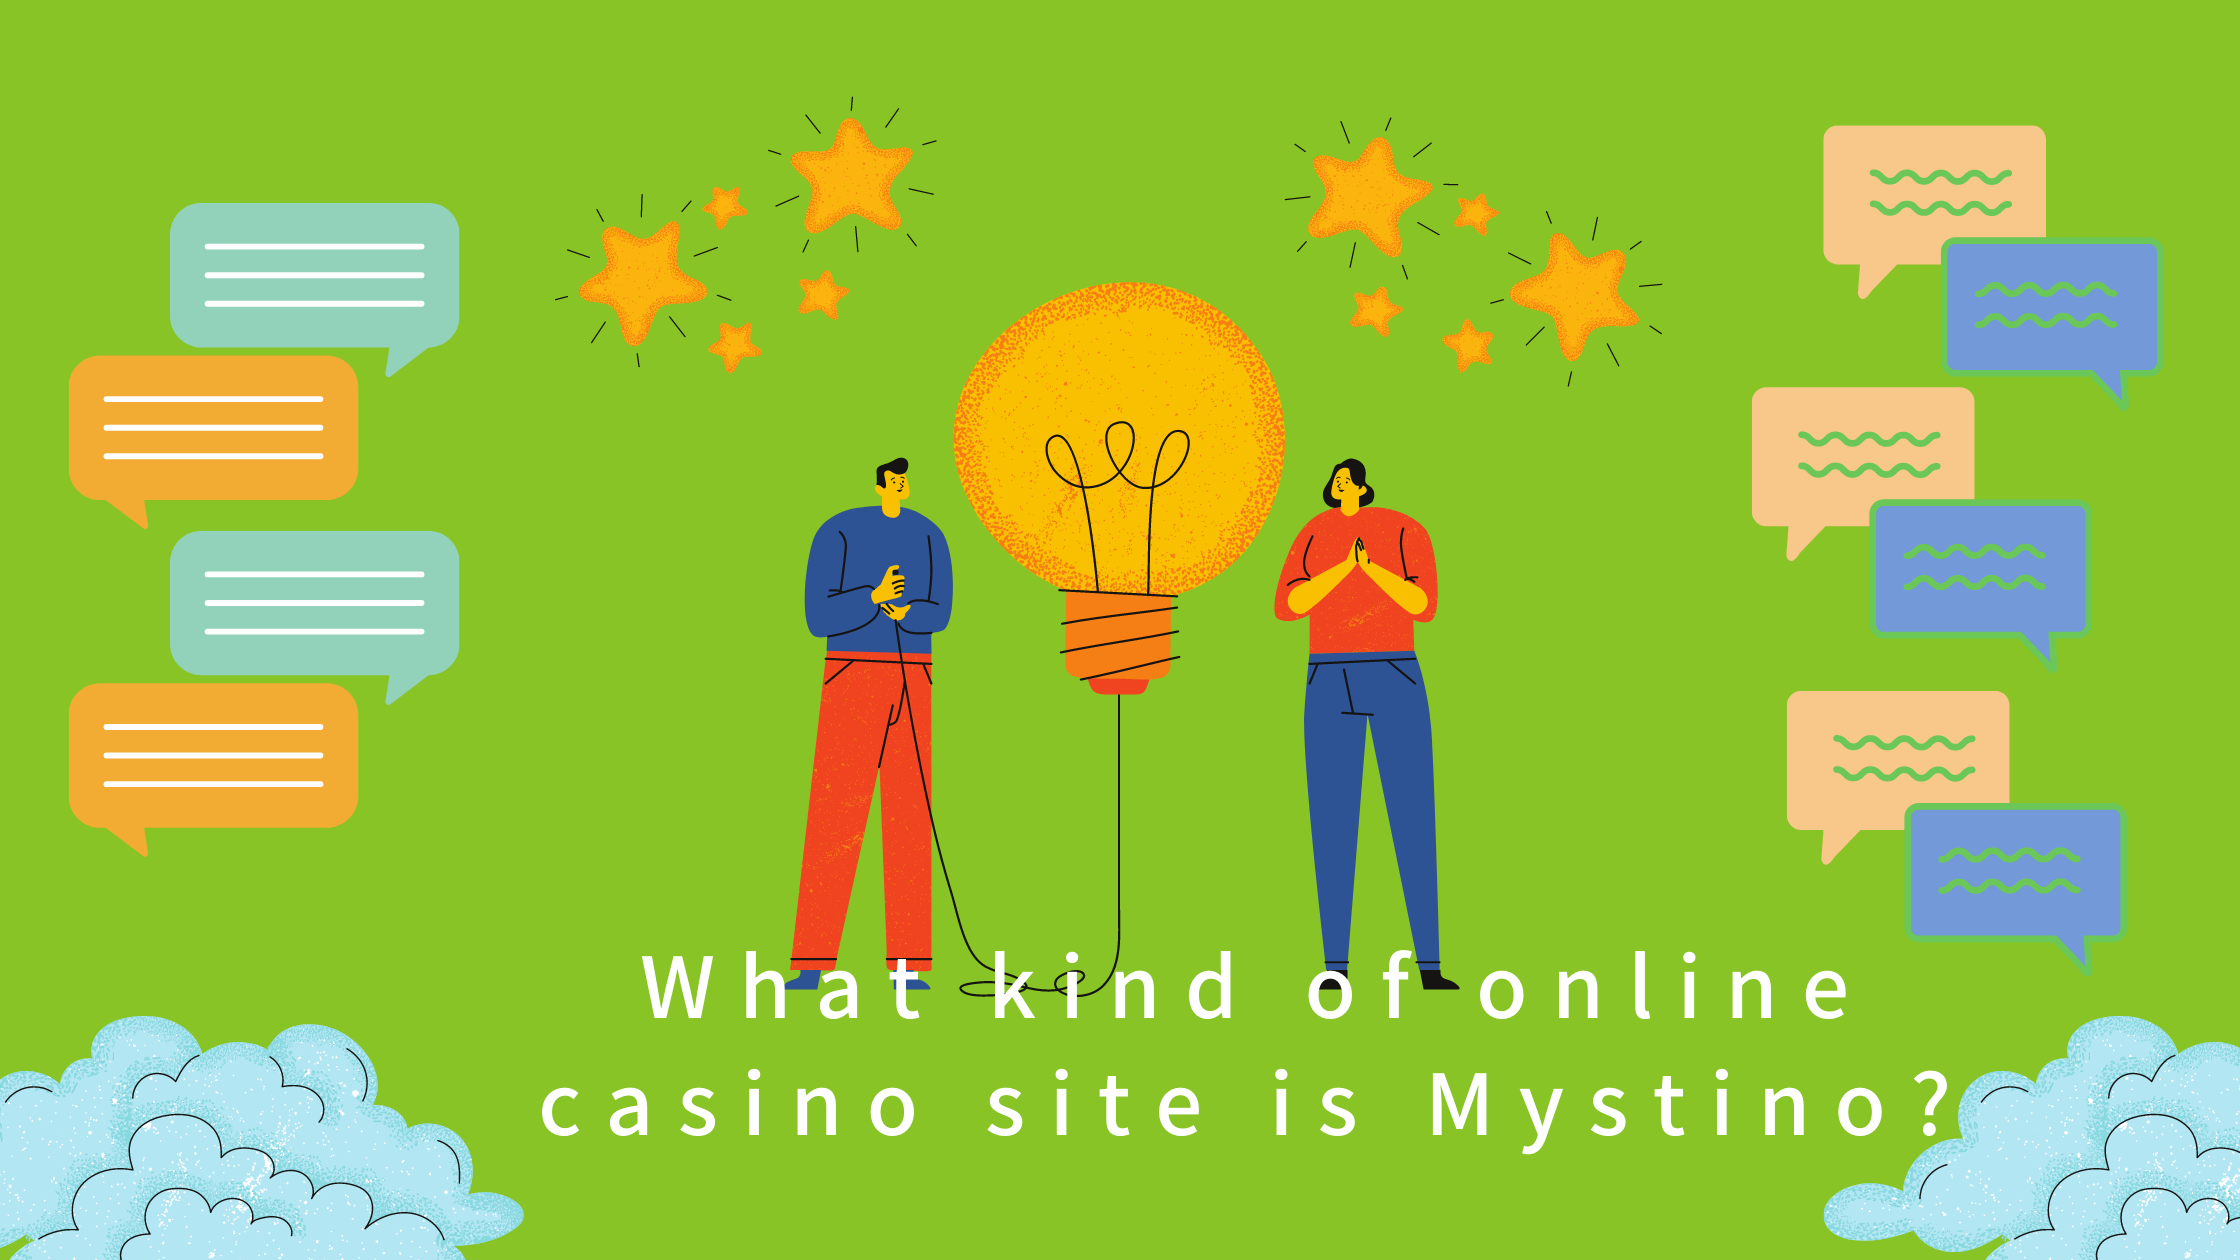 What kind of online casino site is Mystino?